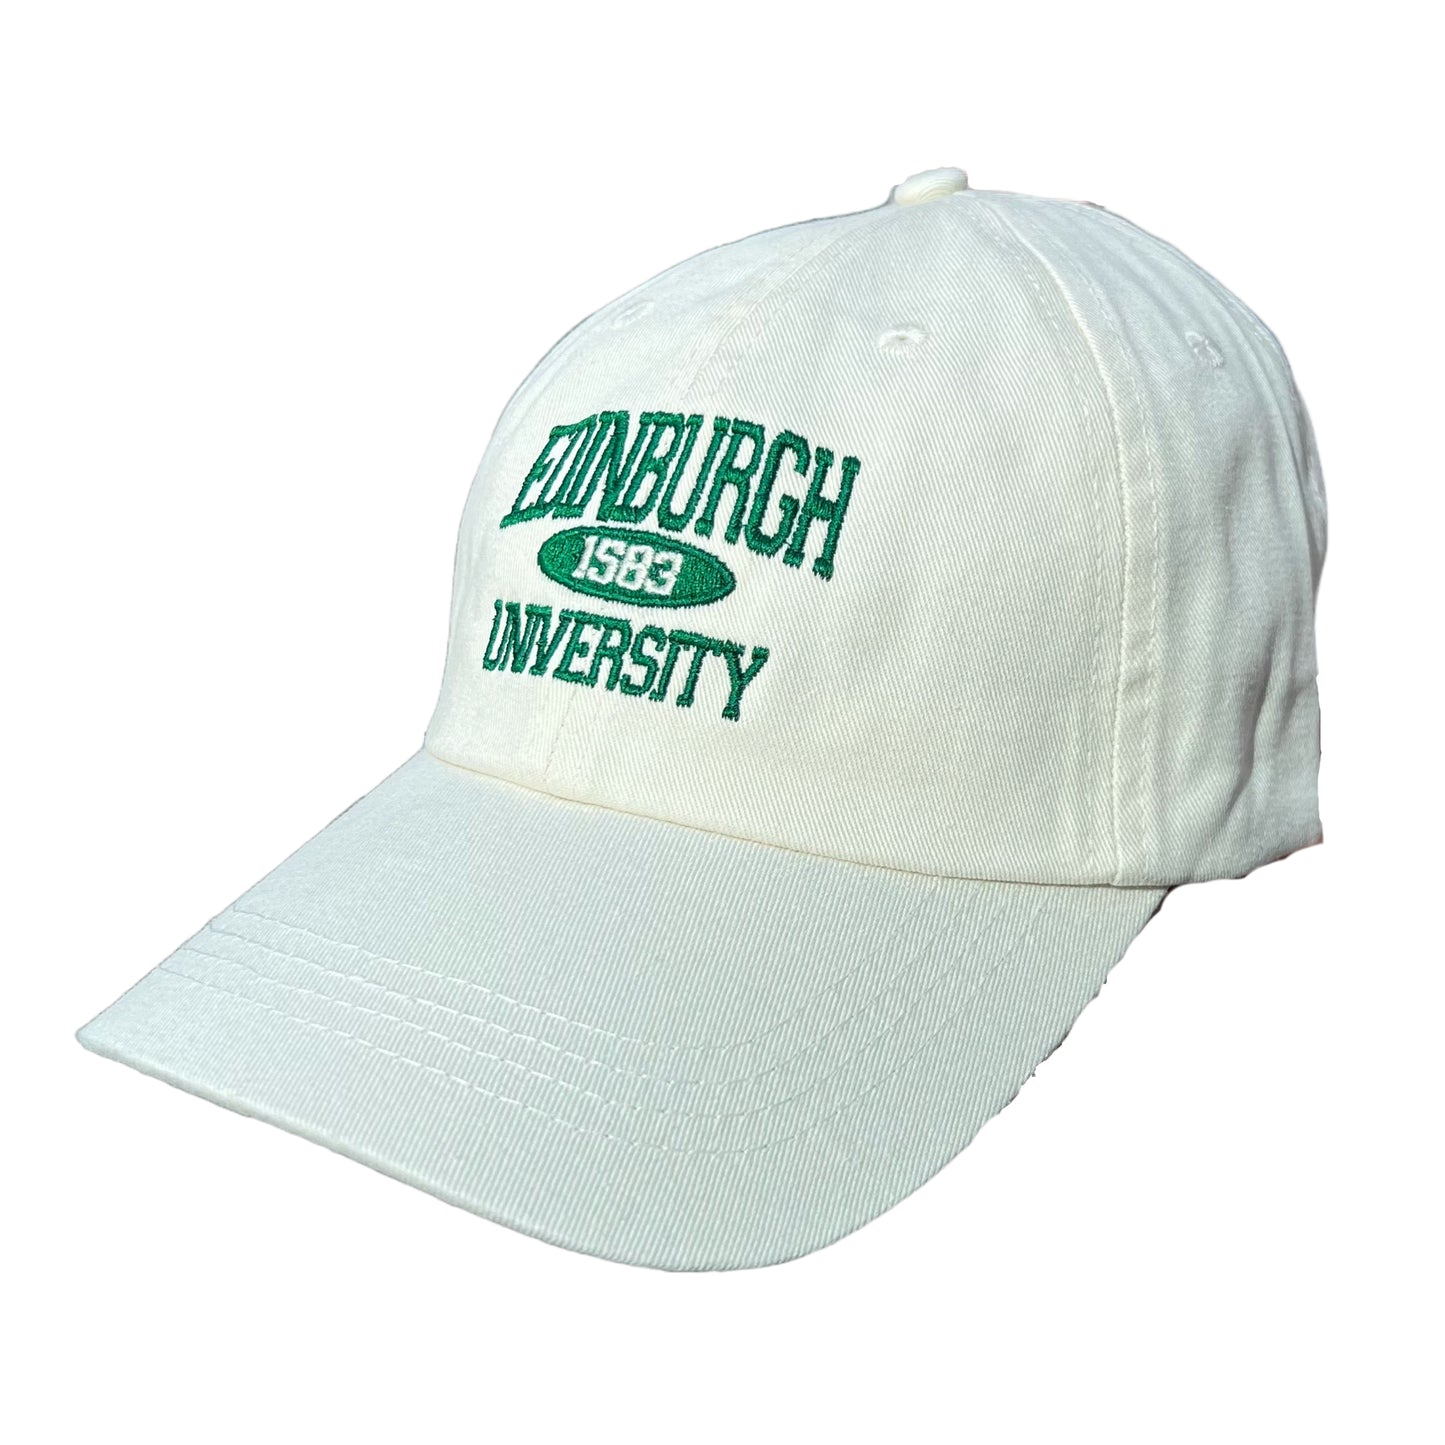 Cream Baseball cap with green embriodered text stating 'EDINGBURGH UNIVERSITY'. Inbetween is text stating '1583'.